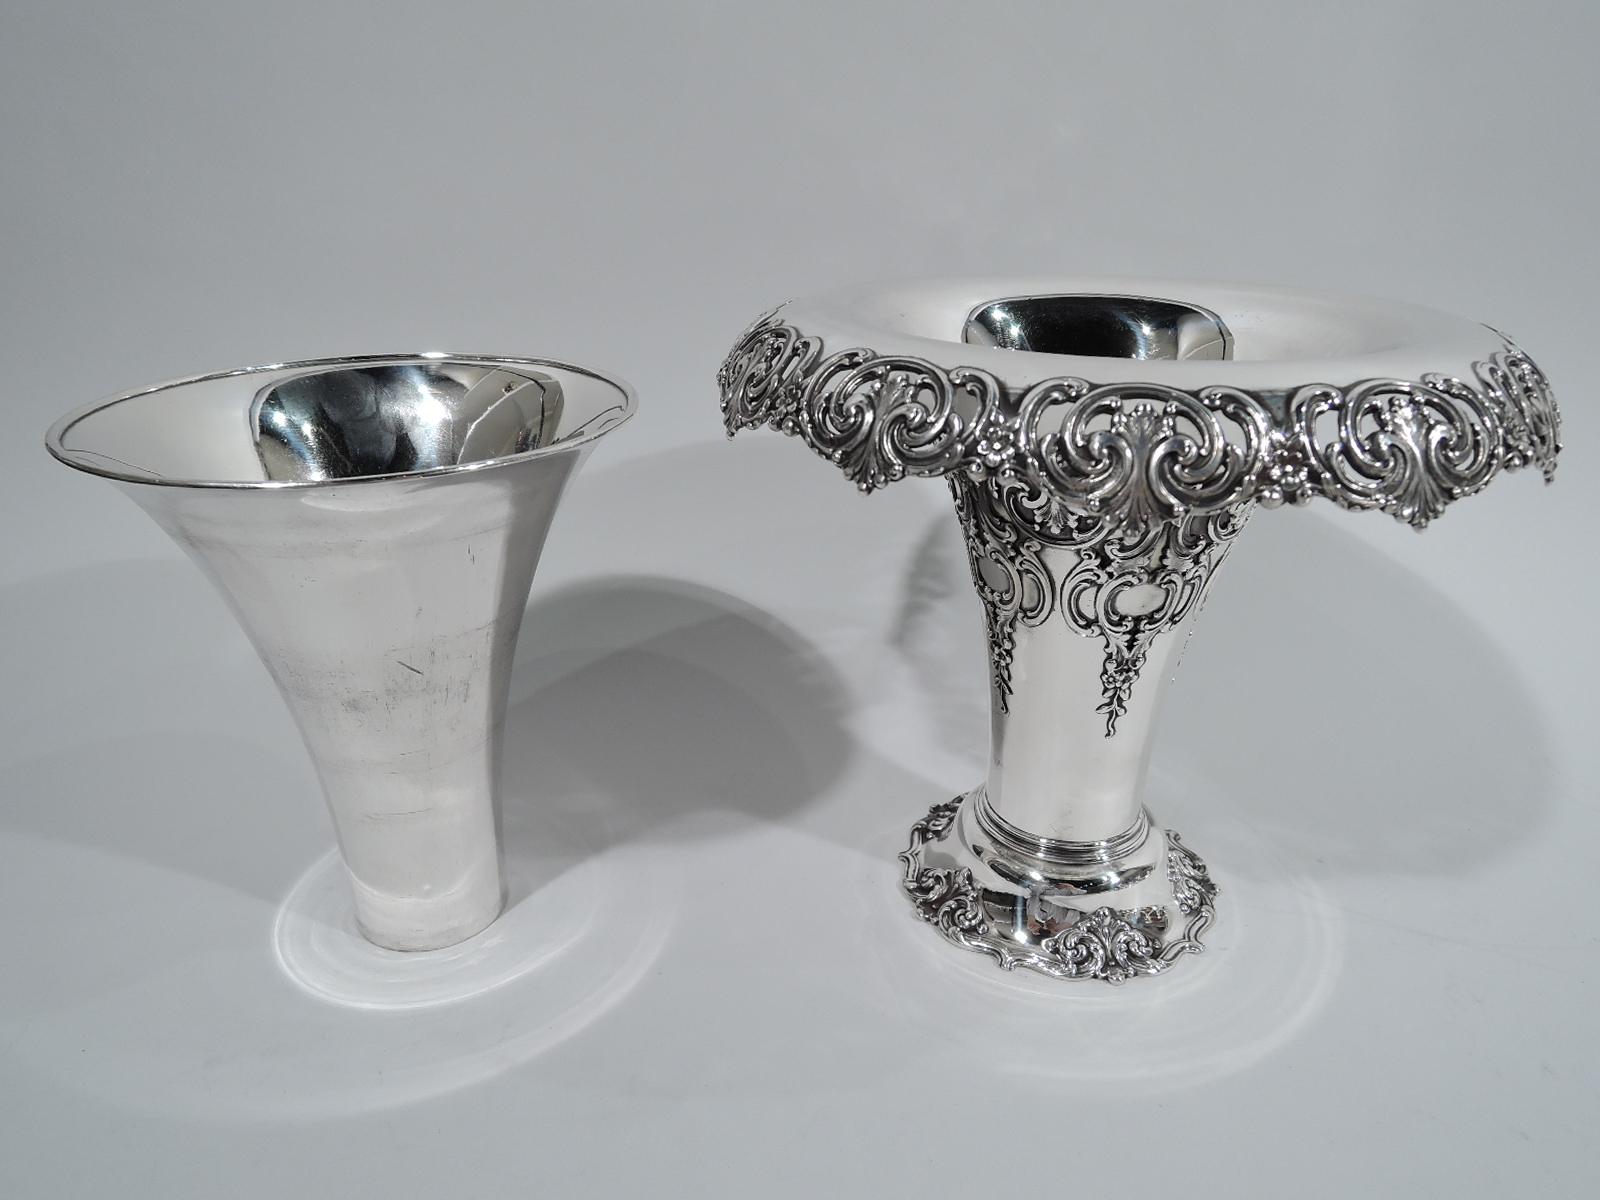 Edwardian classical sterling silver vase. Made by Tiffany & Co. in New York. Conical on raised and spread foot. Pierced and turned-down rim with scrolls, leaves, and flowers. Body applied with same and foot has ogee rim interspersed with leaves.